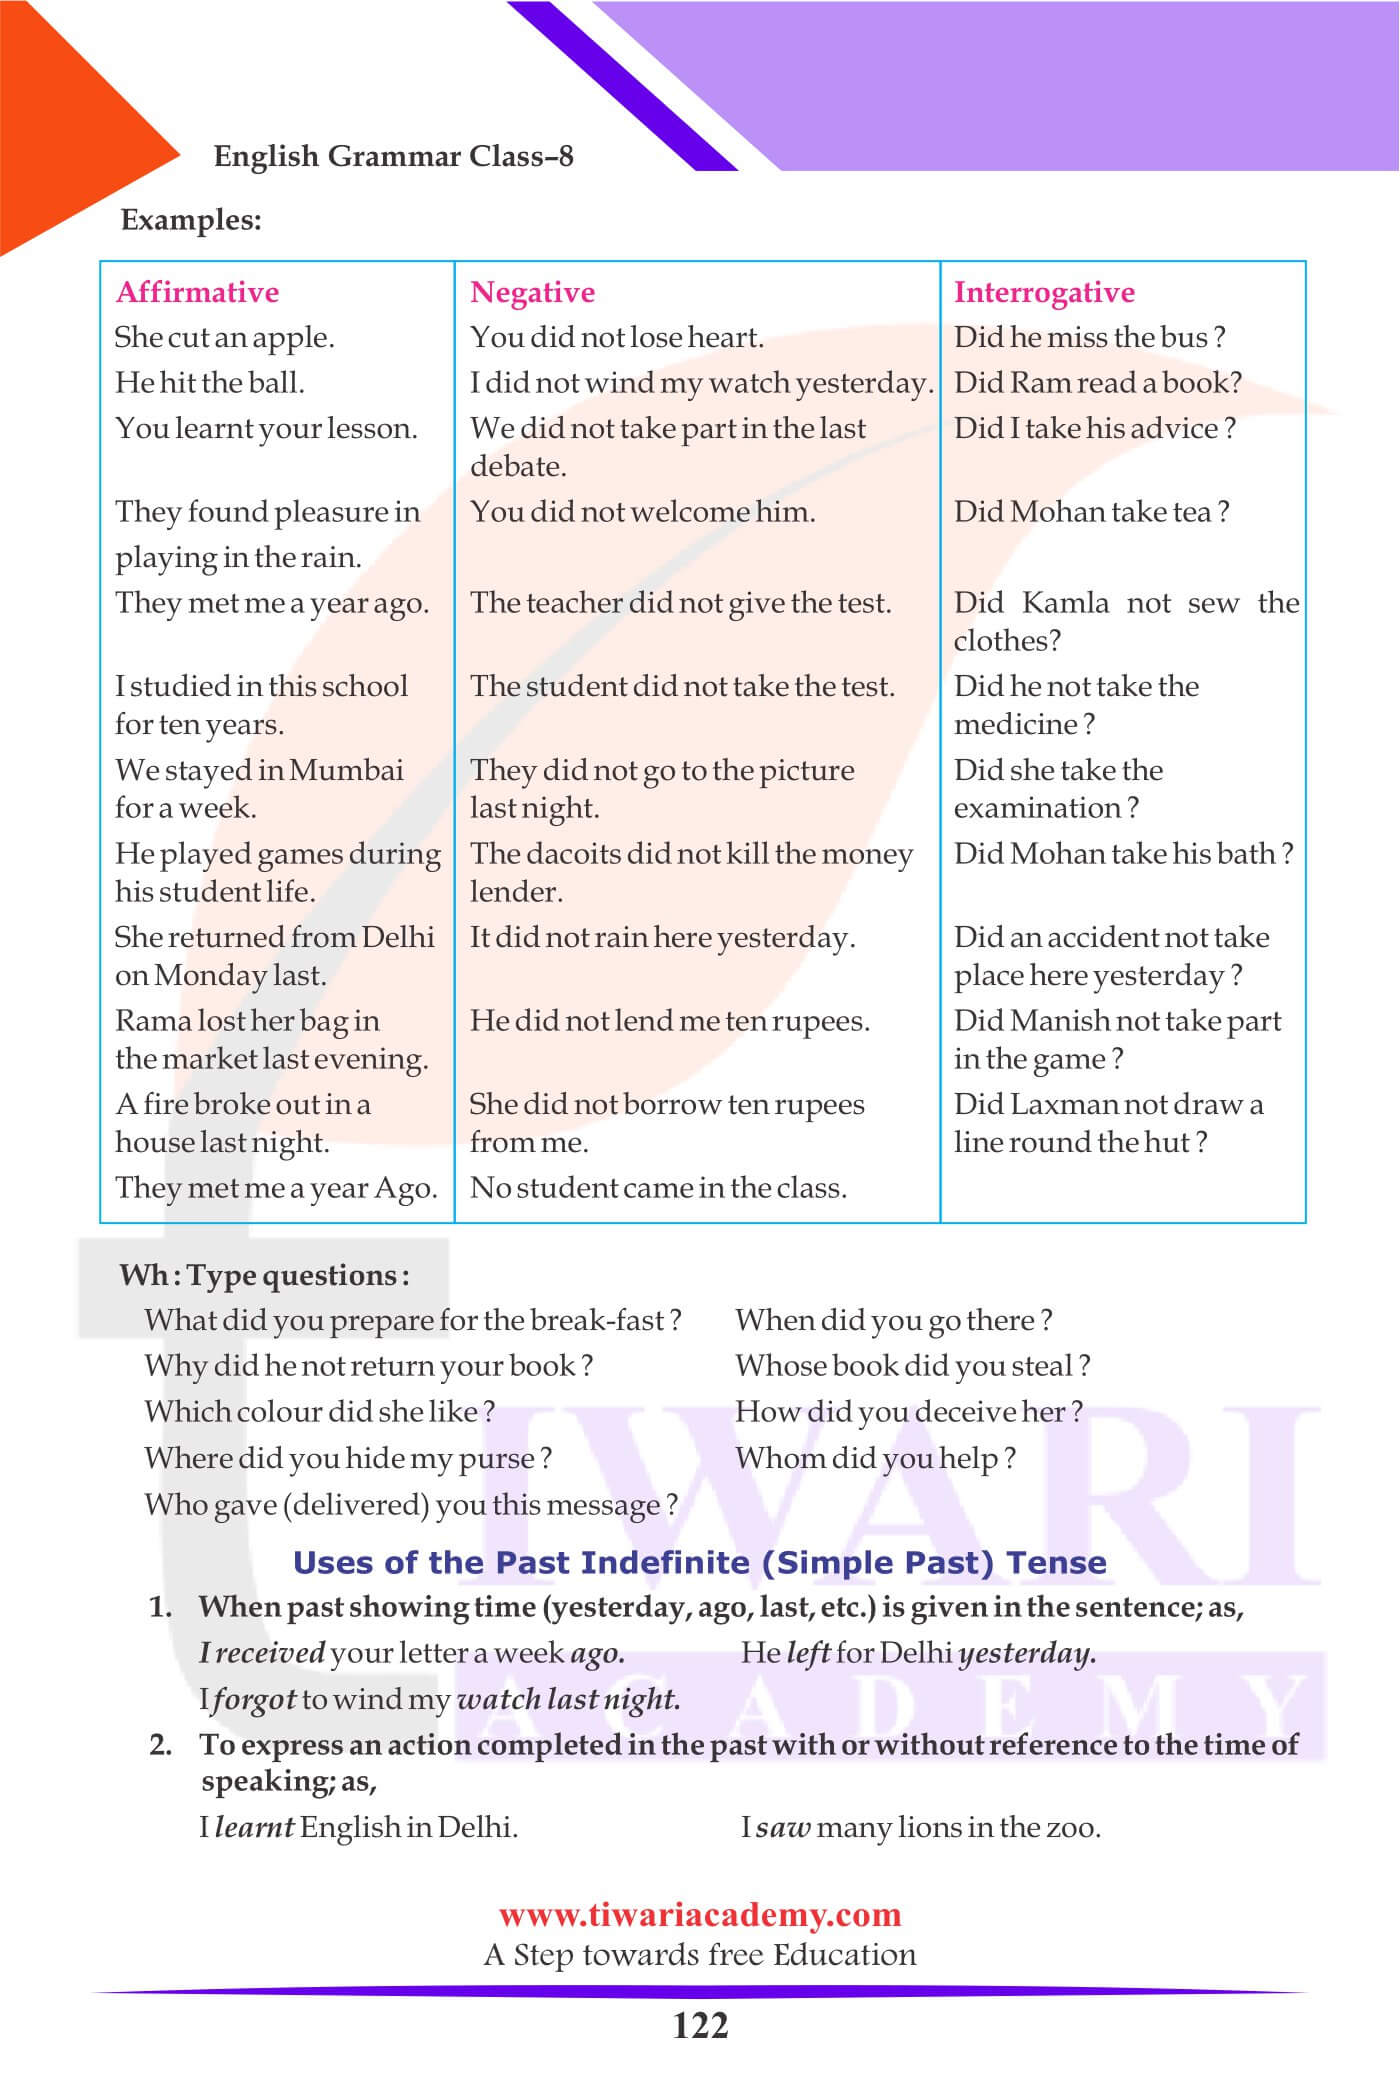 Class 8 Grammar Tense and its use